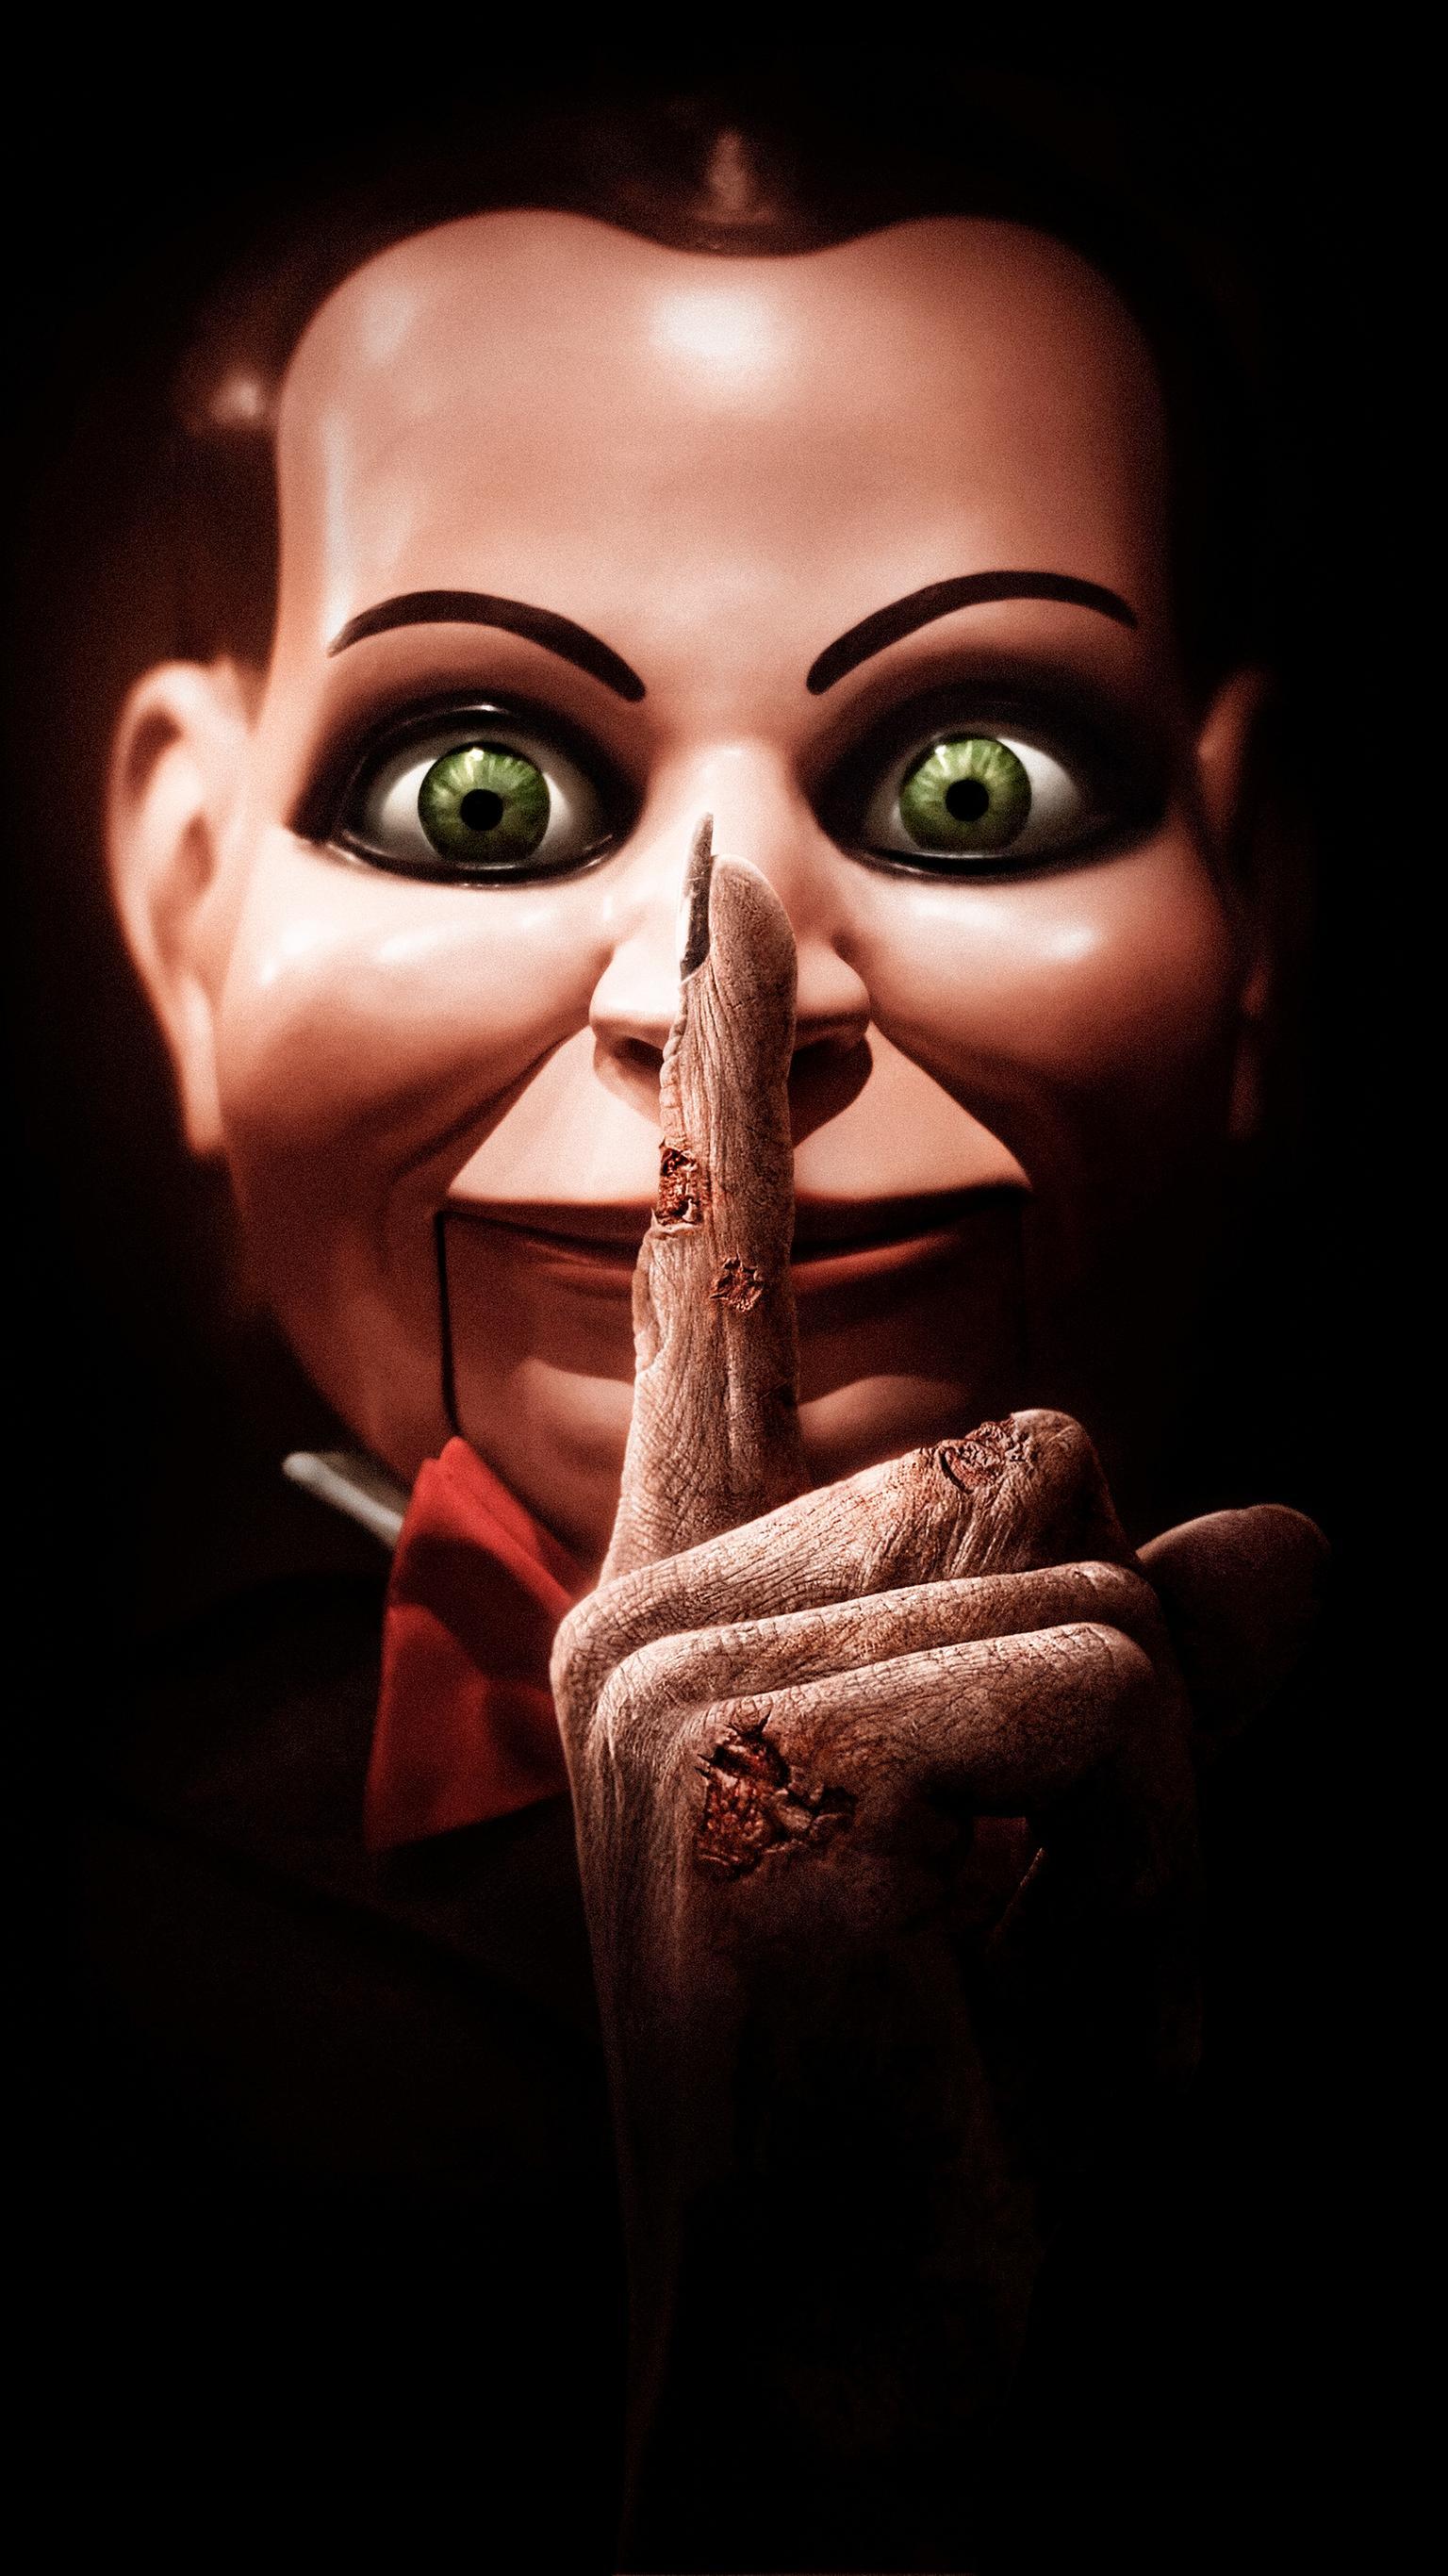 Dead Silence Hides My Cries Wallpapers